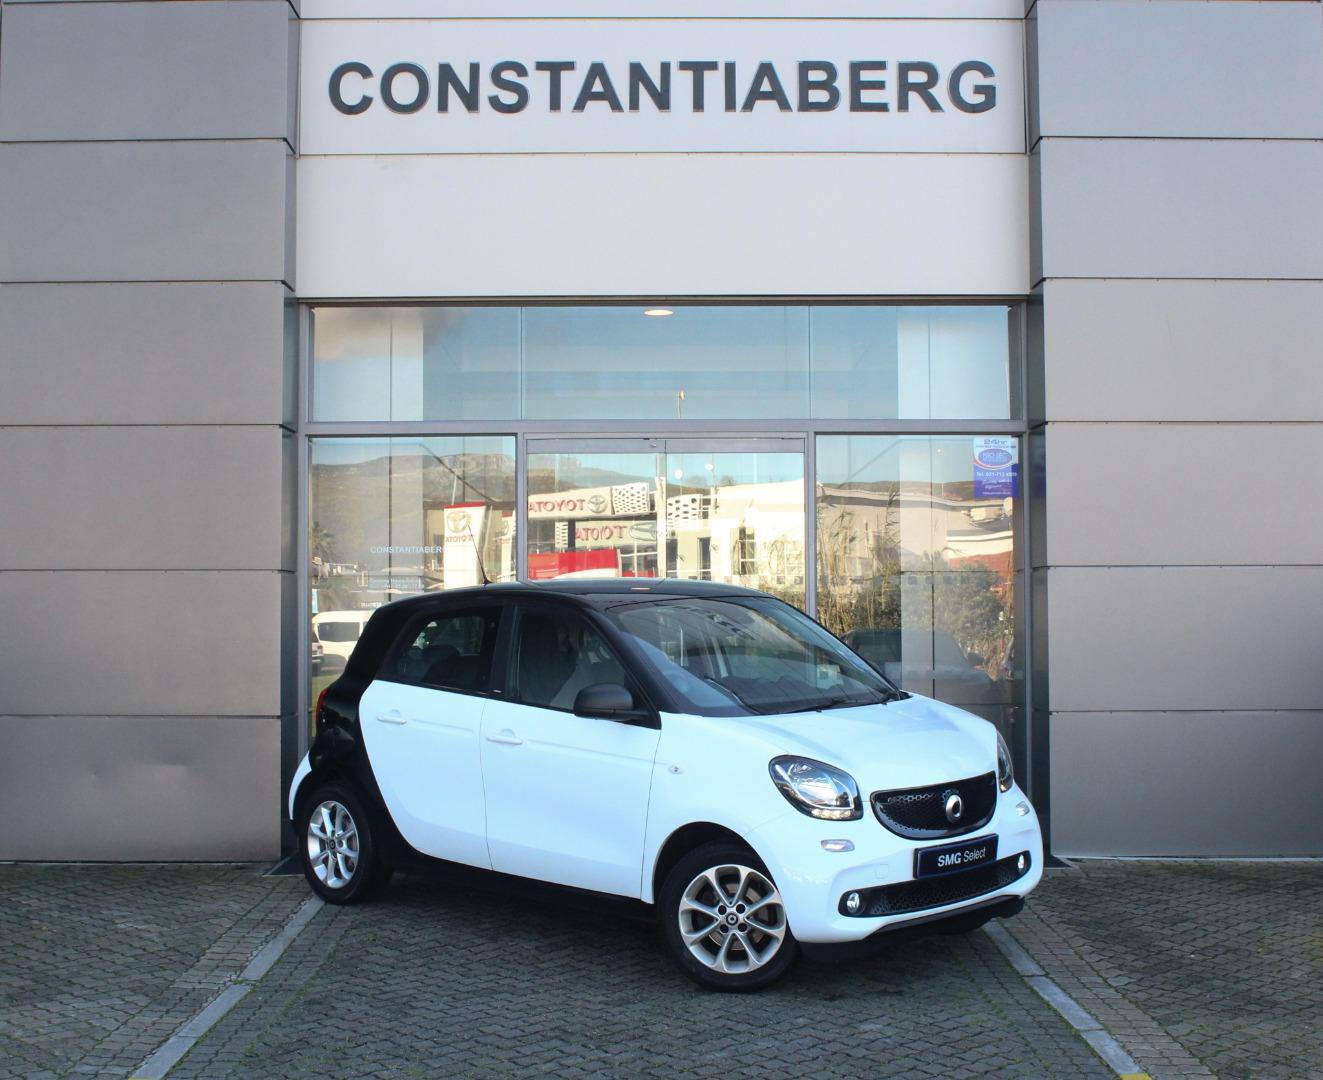 2018 Smart ForFour  for sale - 5566988